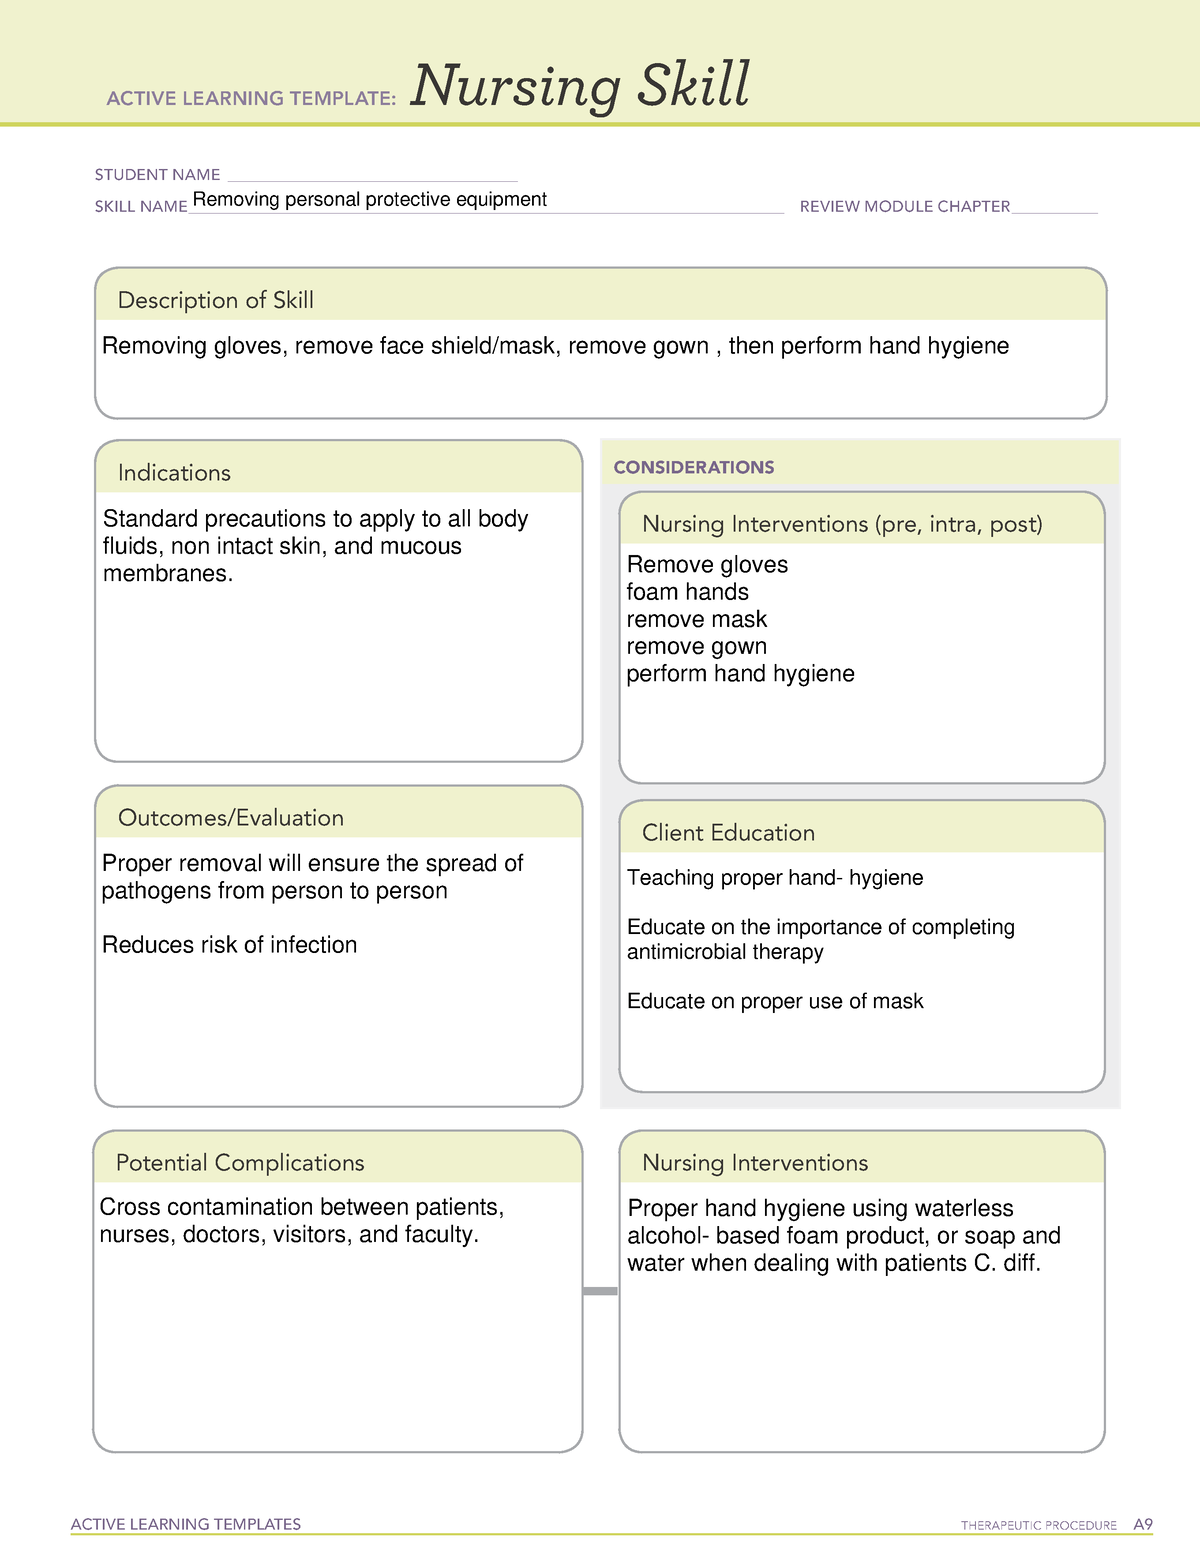 ATI Active learning template - ACTIVE LEARNING TEMPLATES THERAPEUTIC ...